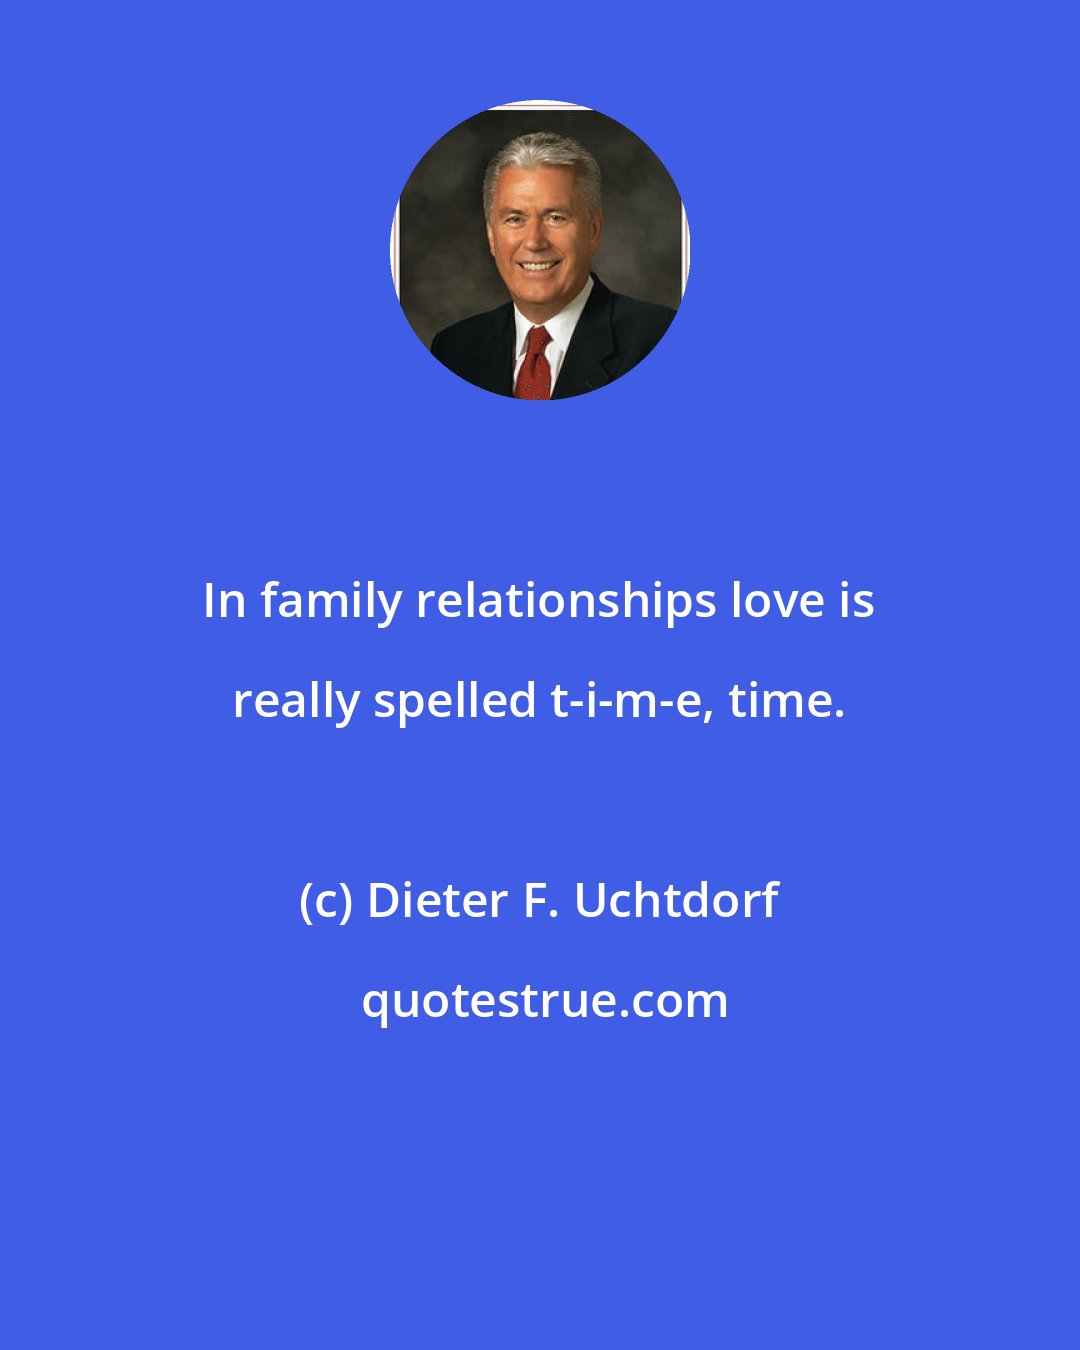 Dieter F. Uchtdorf: In family relationships love is really spelled t-i-m-e, time.